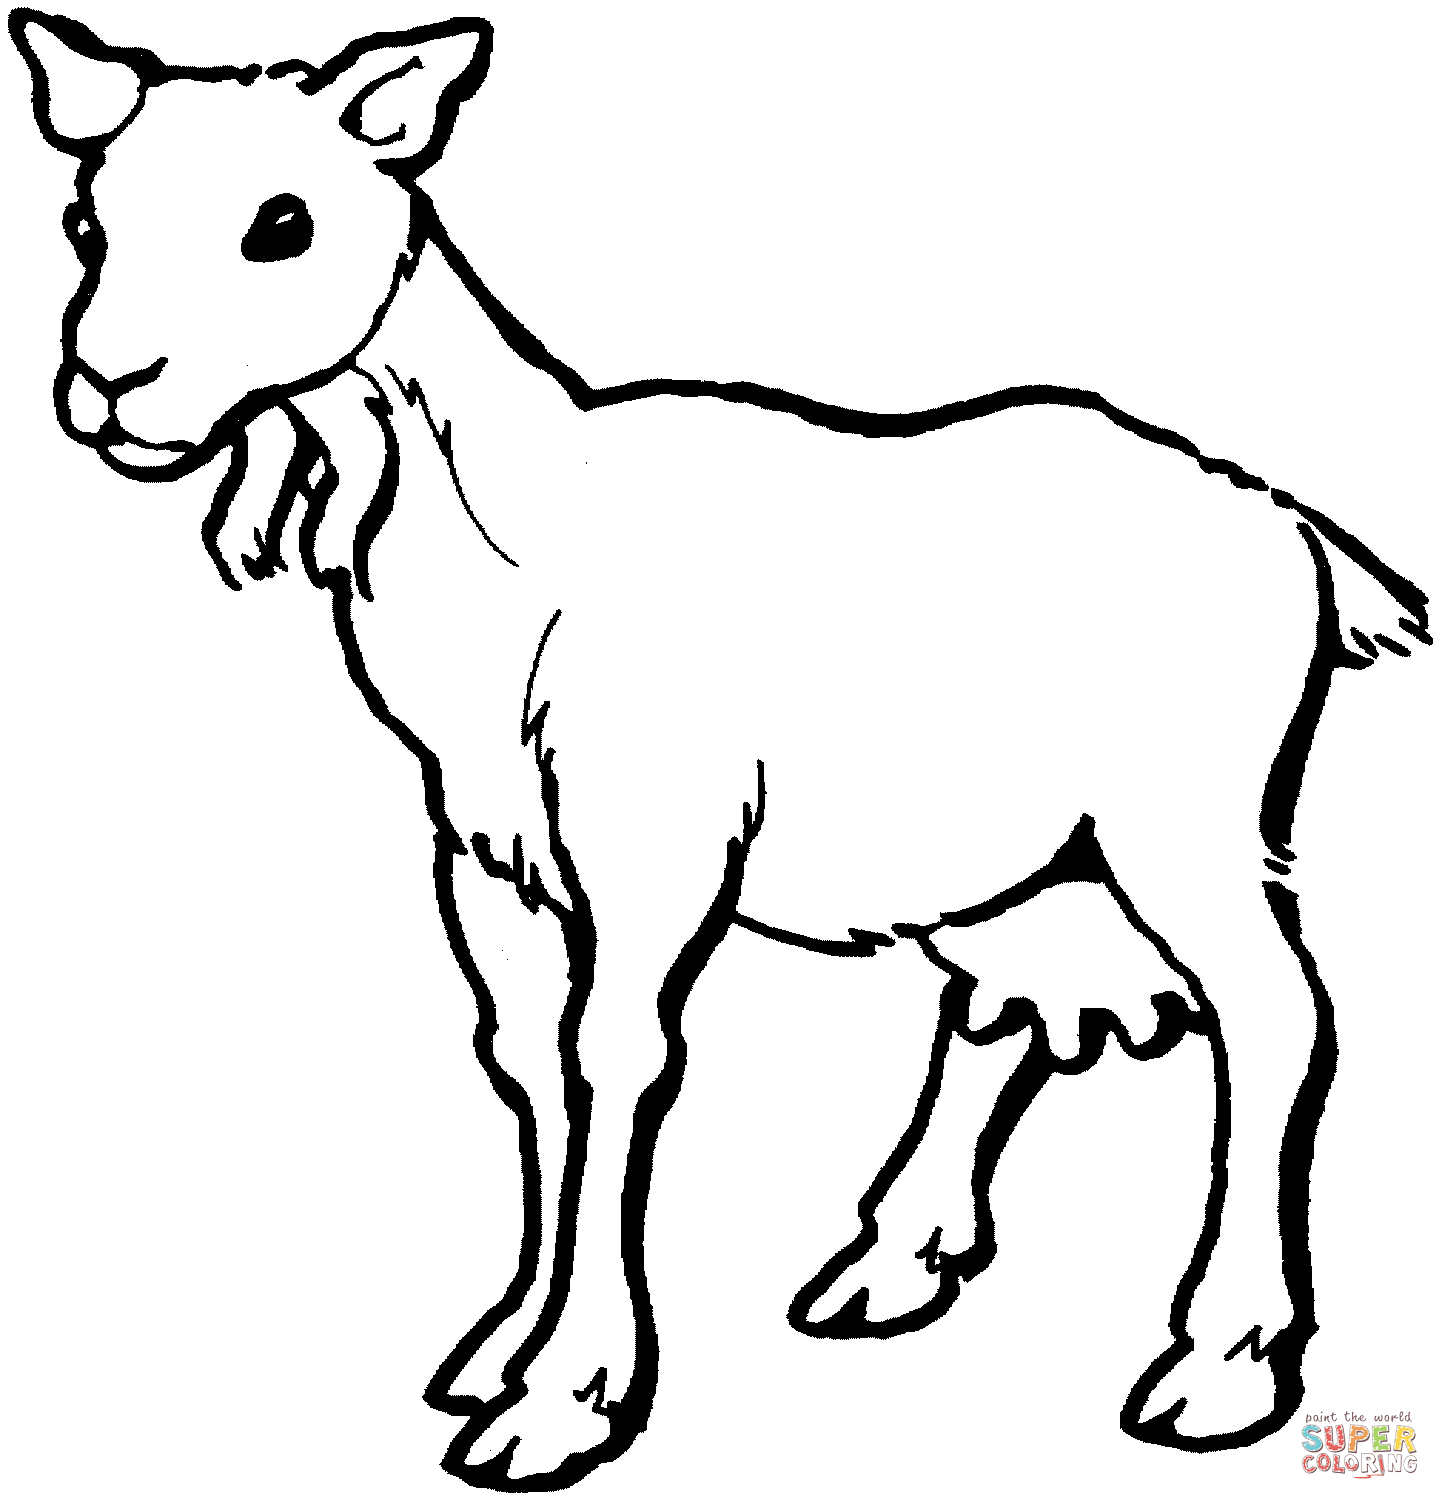 Goat clipart female goat. Coloring page free printable